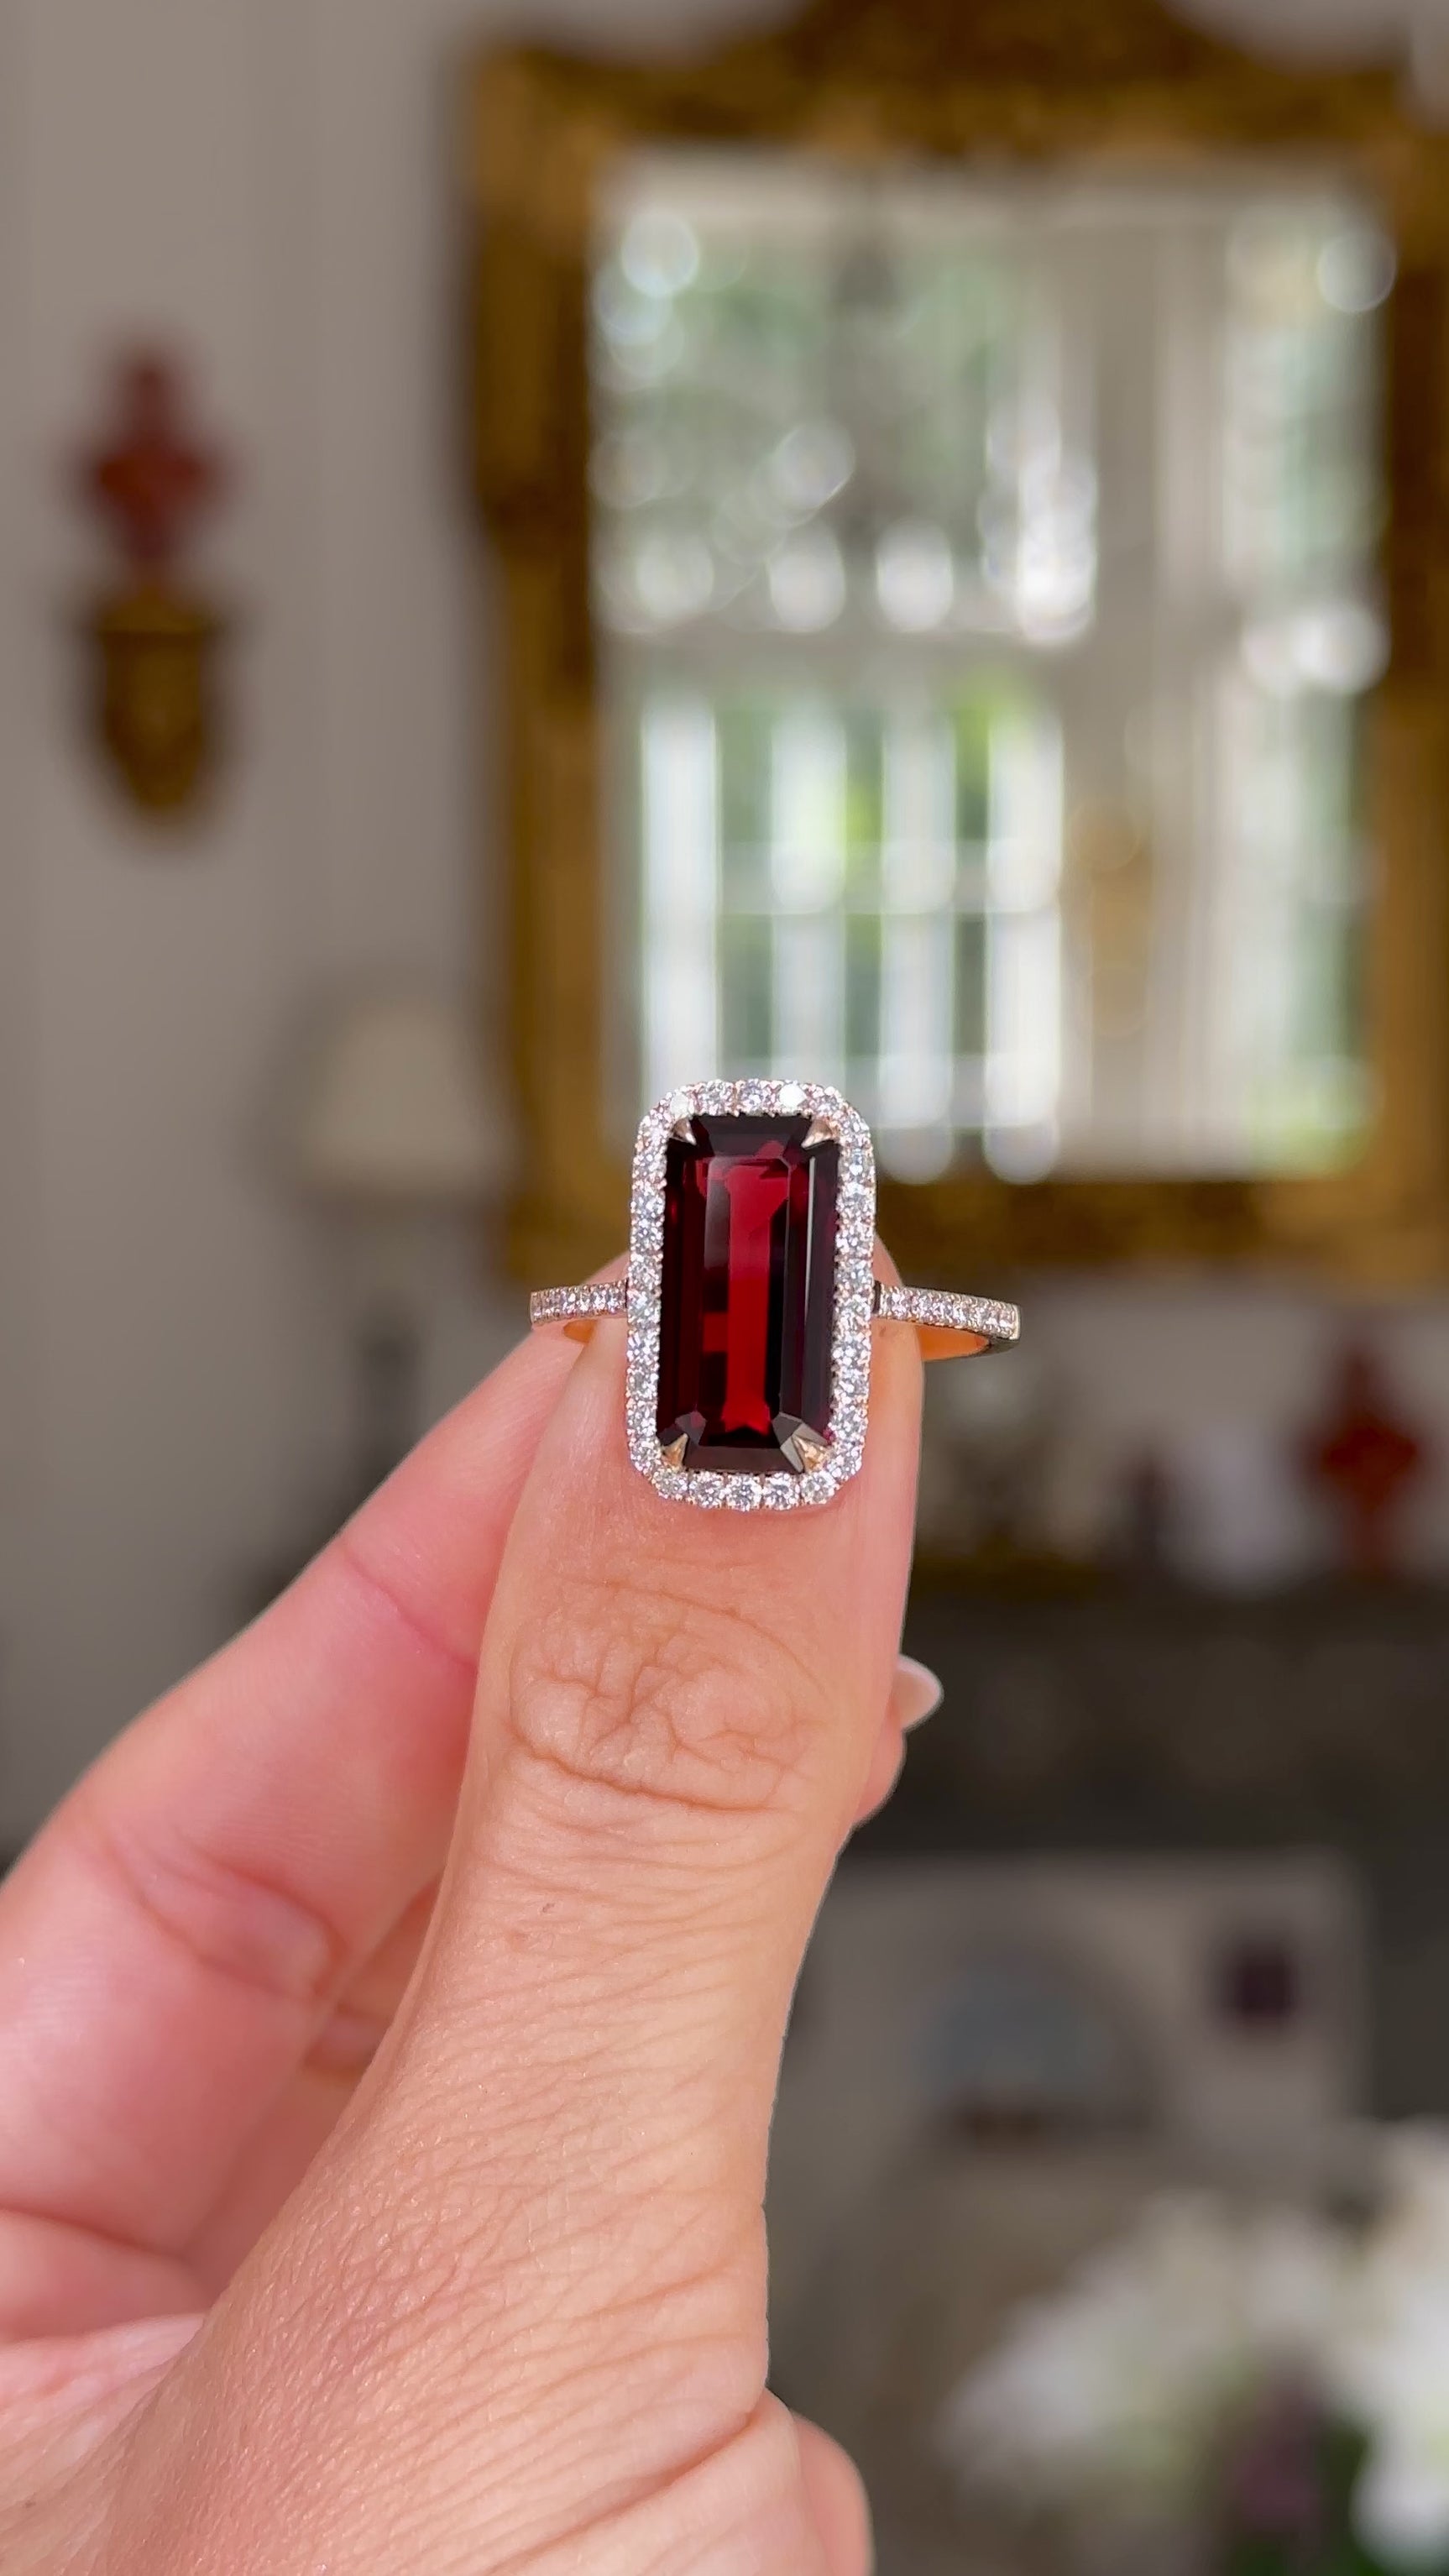 red garnet and diamond cluster ring held in fingers and rotated to give perspective.